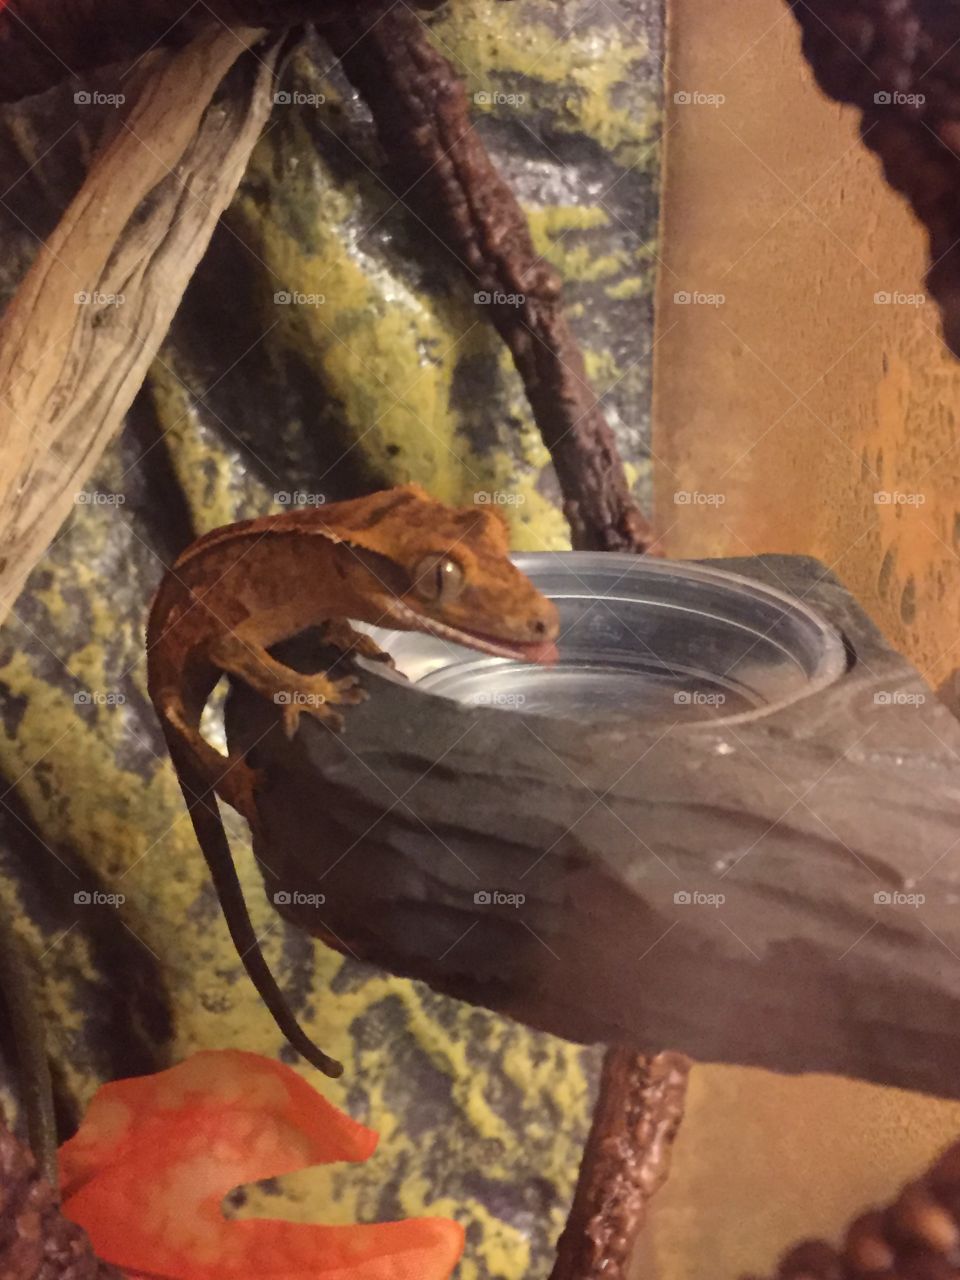 Crested Gecko baby drinking